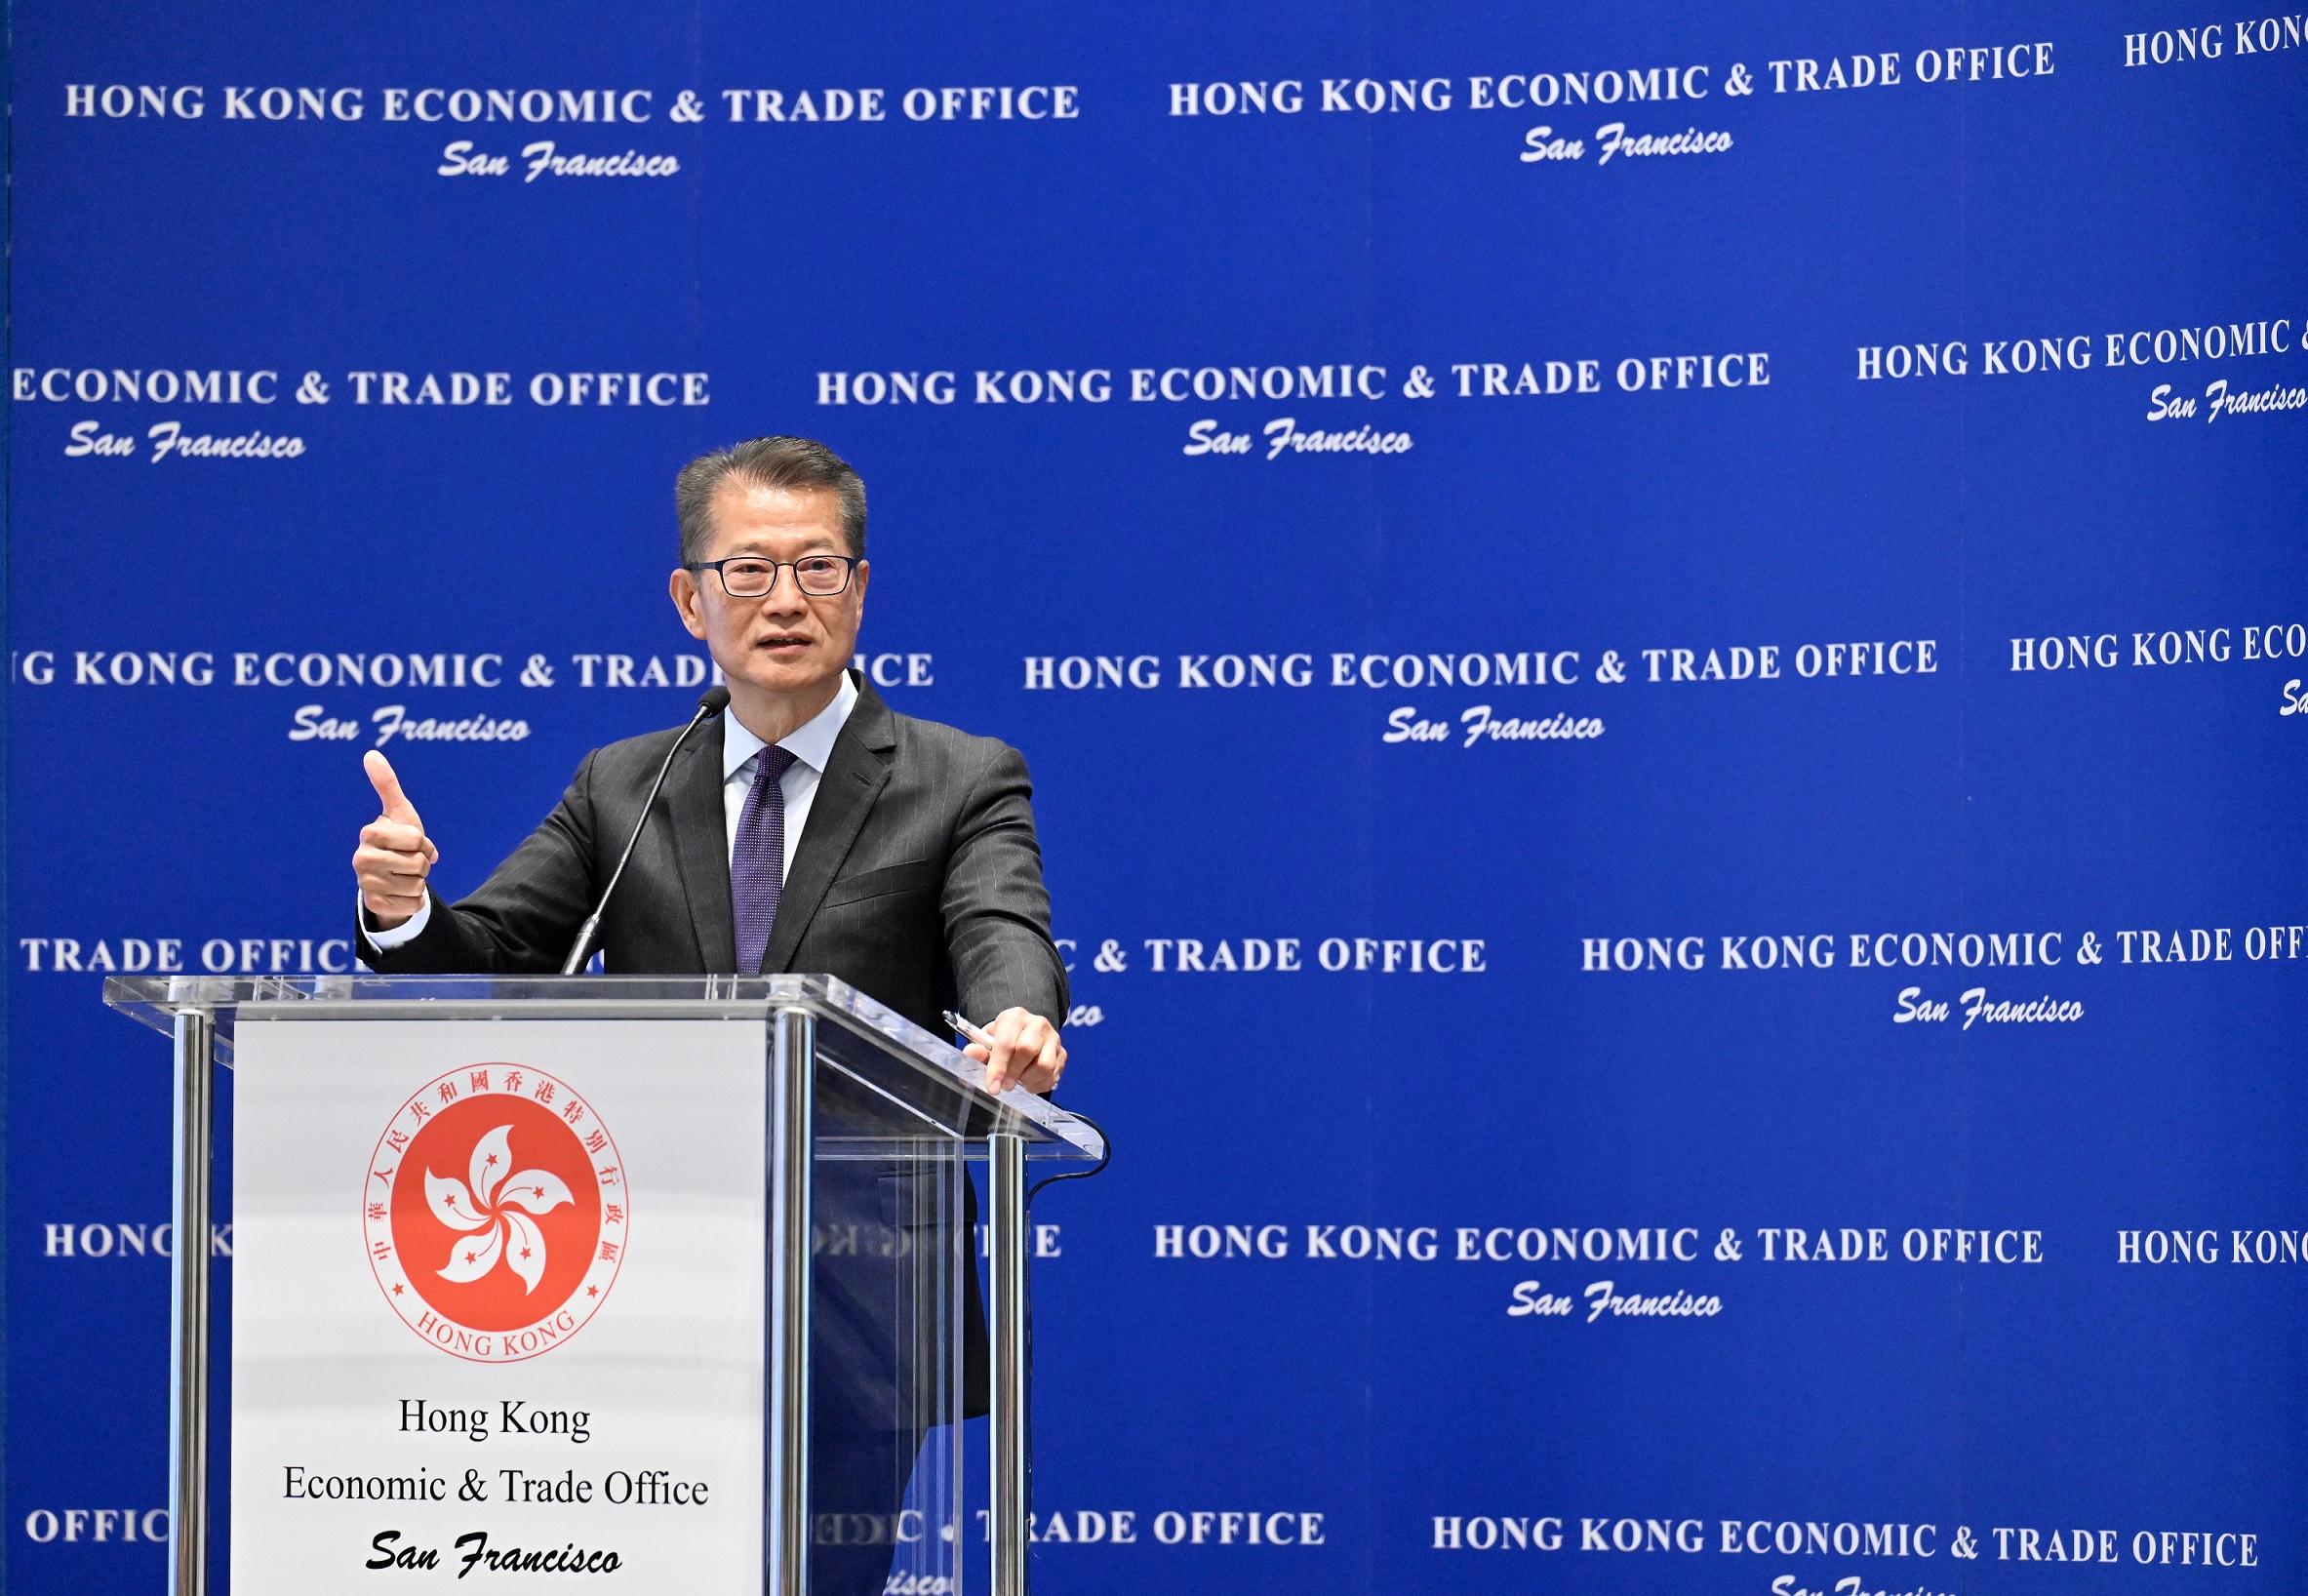 The Financial Secretary, Mr Paul Chan, began his visit to the United States (US) on May 28 (San Francisco time). Photo shows Mr Chan speaking at a business luncheon jointly organised by the Hong Kong Economic and Trade Office in San Francisco and the Bay Area Council, a business organisation in San Francisco, the US.